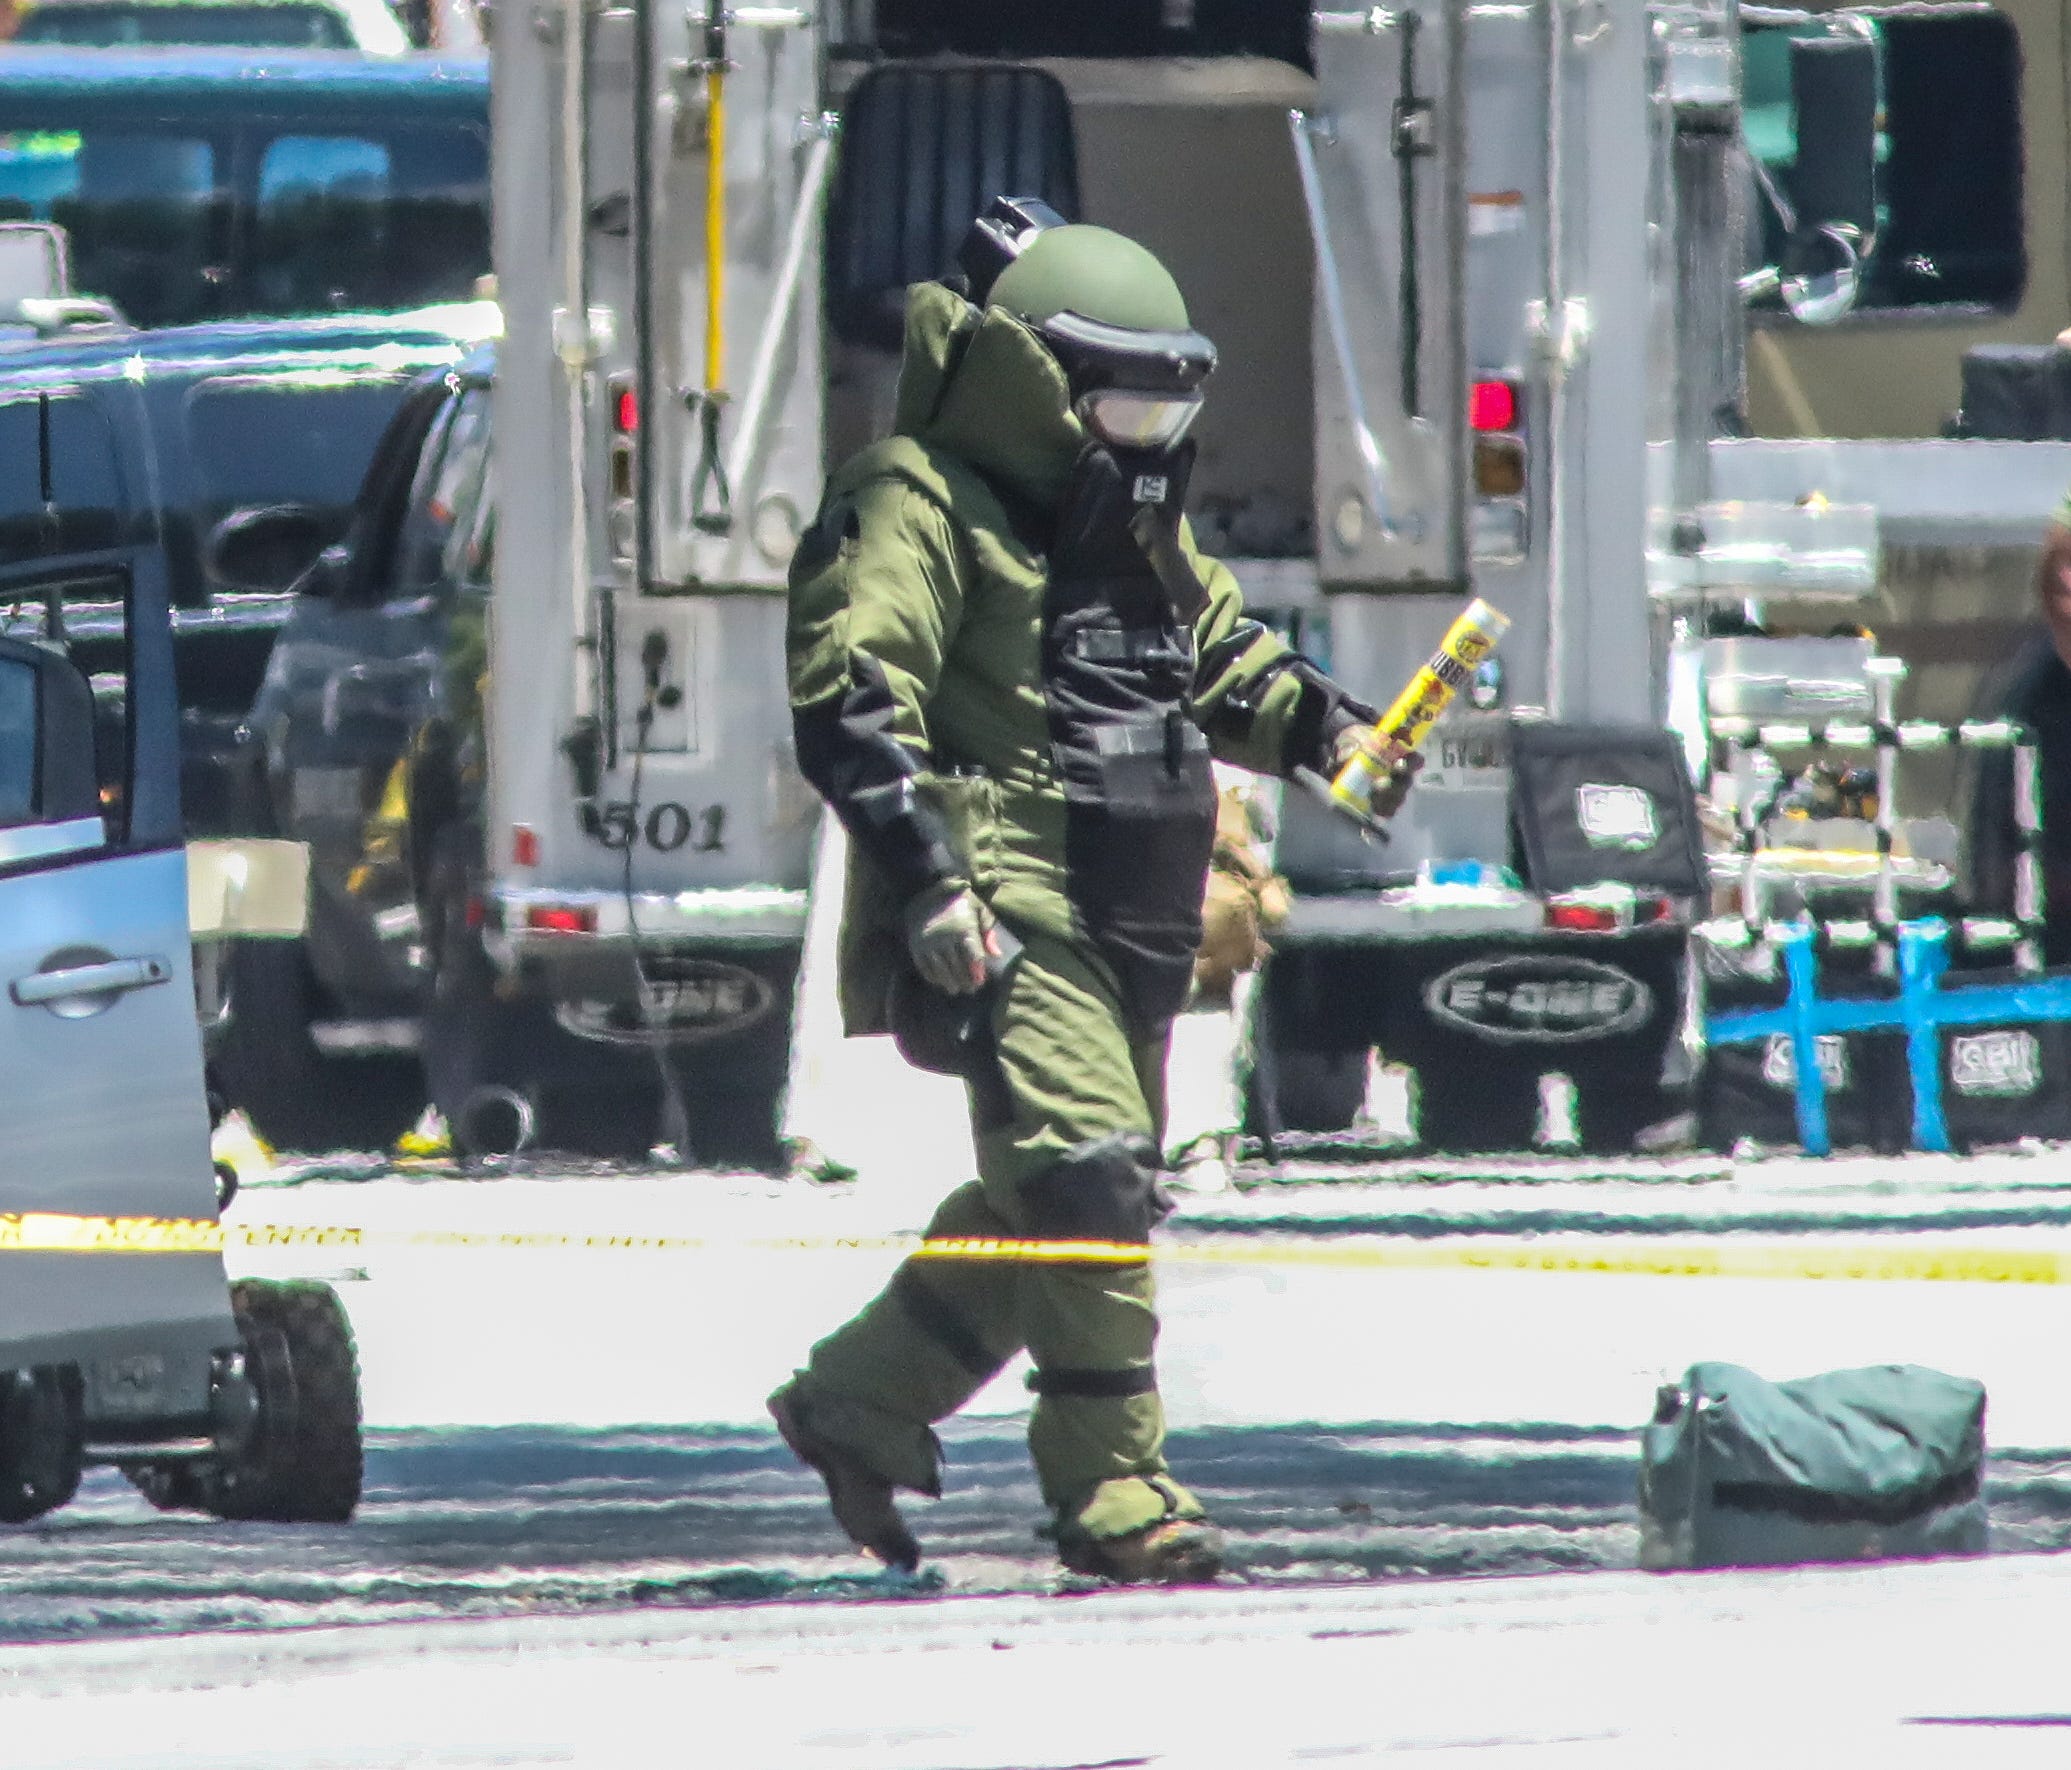 The Atlanta police bomb squad responds after a veteran who says he was disgruntled with the Department of Veterans Affairs set himself on fire in protest Tuesday, June 26, 2018 outside the state Capitol in downtown Atlanta, according to the Georgia S